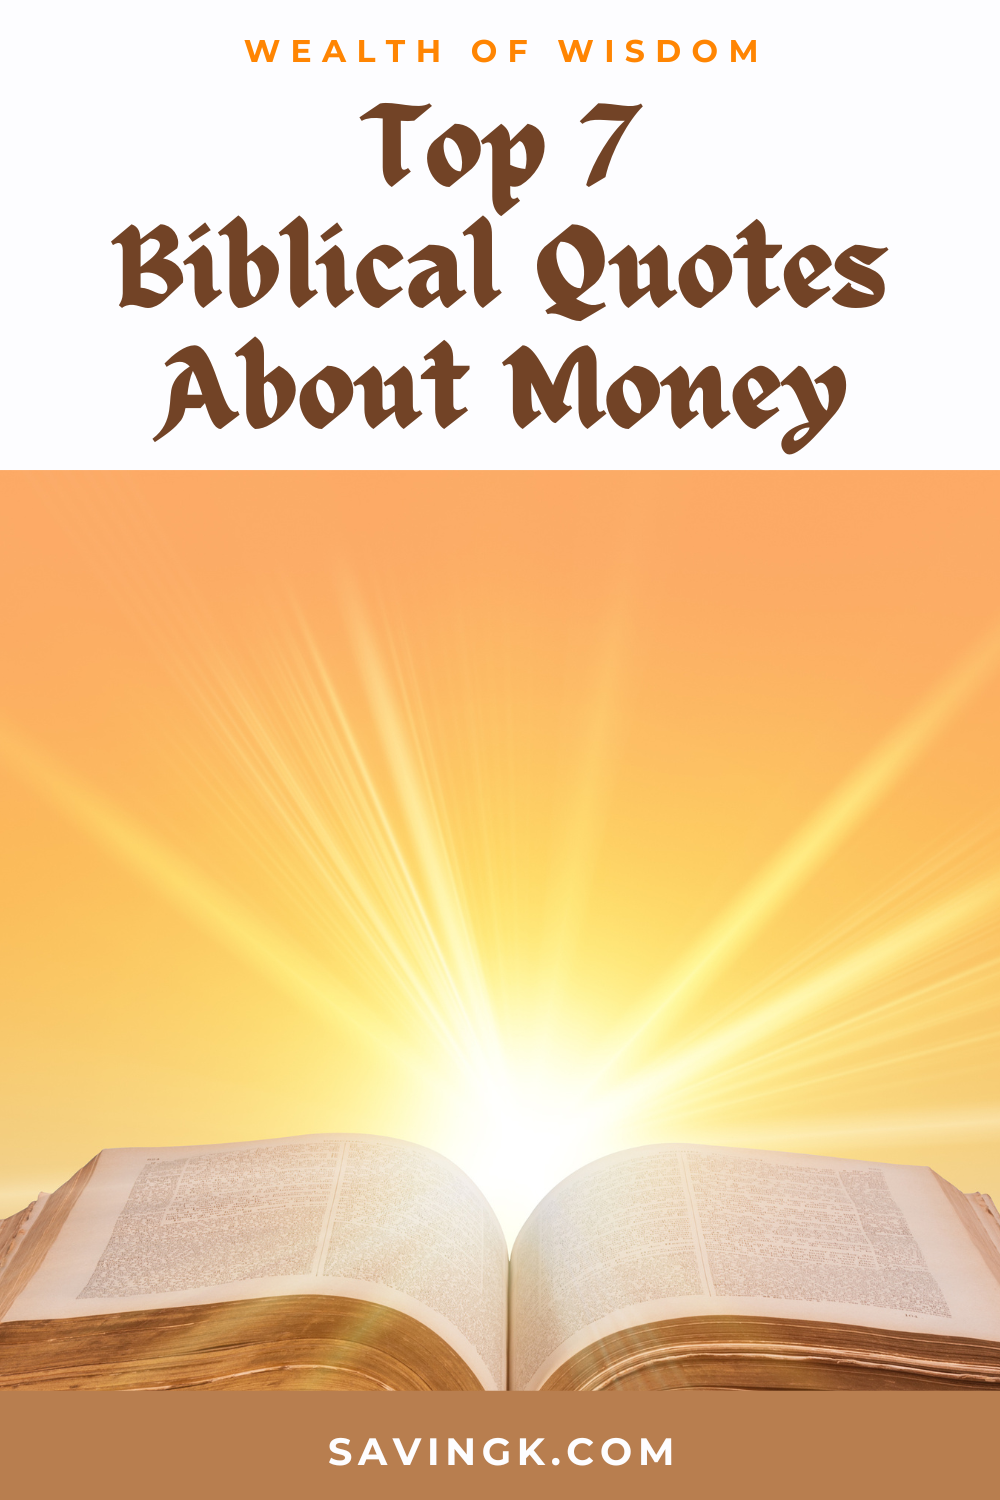 Top Biblical Quotes about Money